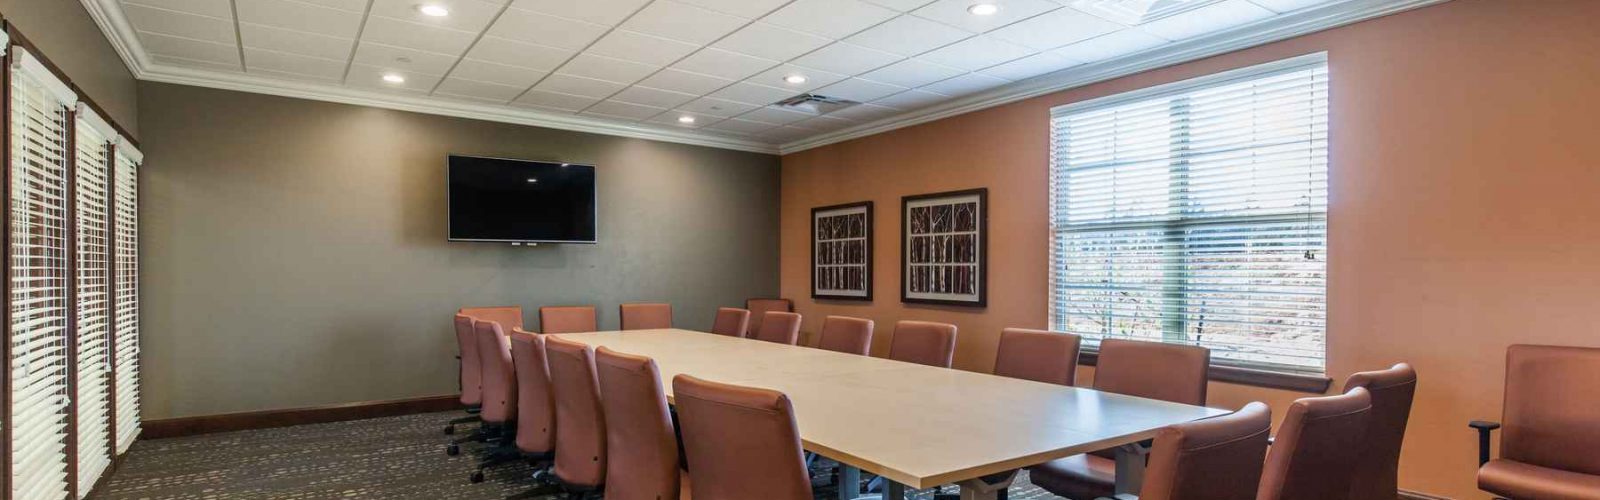 Mon Abri Business Center - Large Conference Room